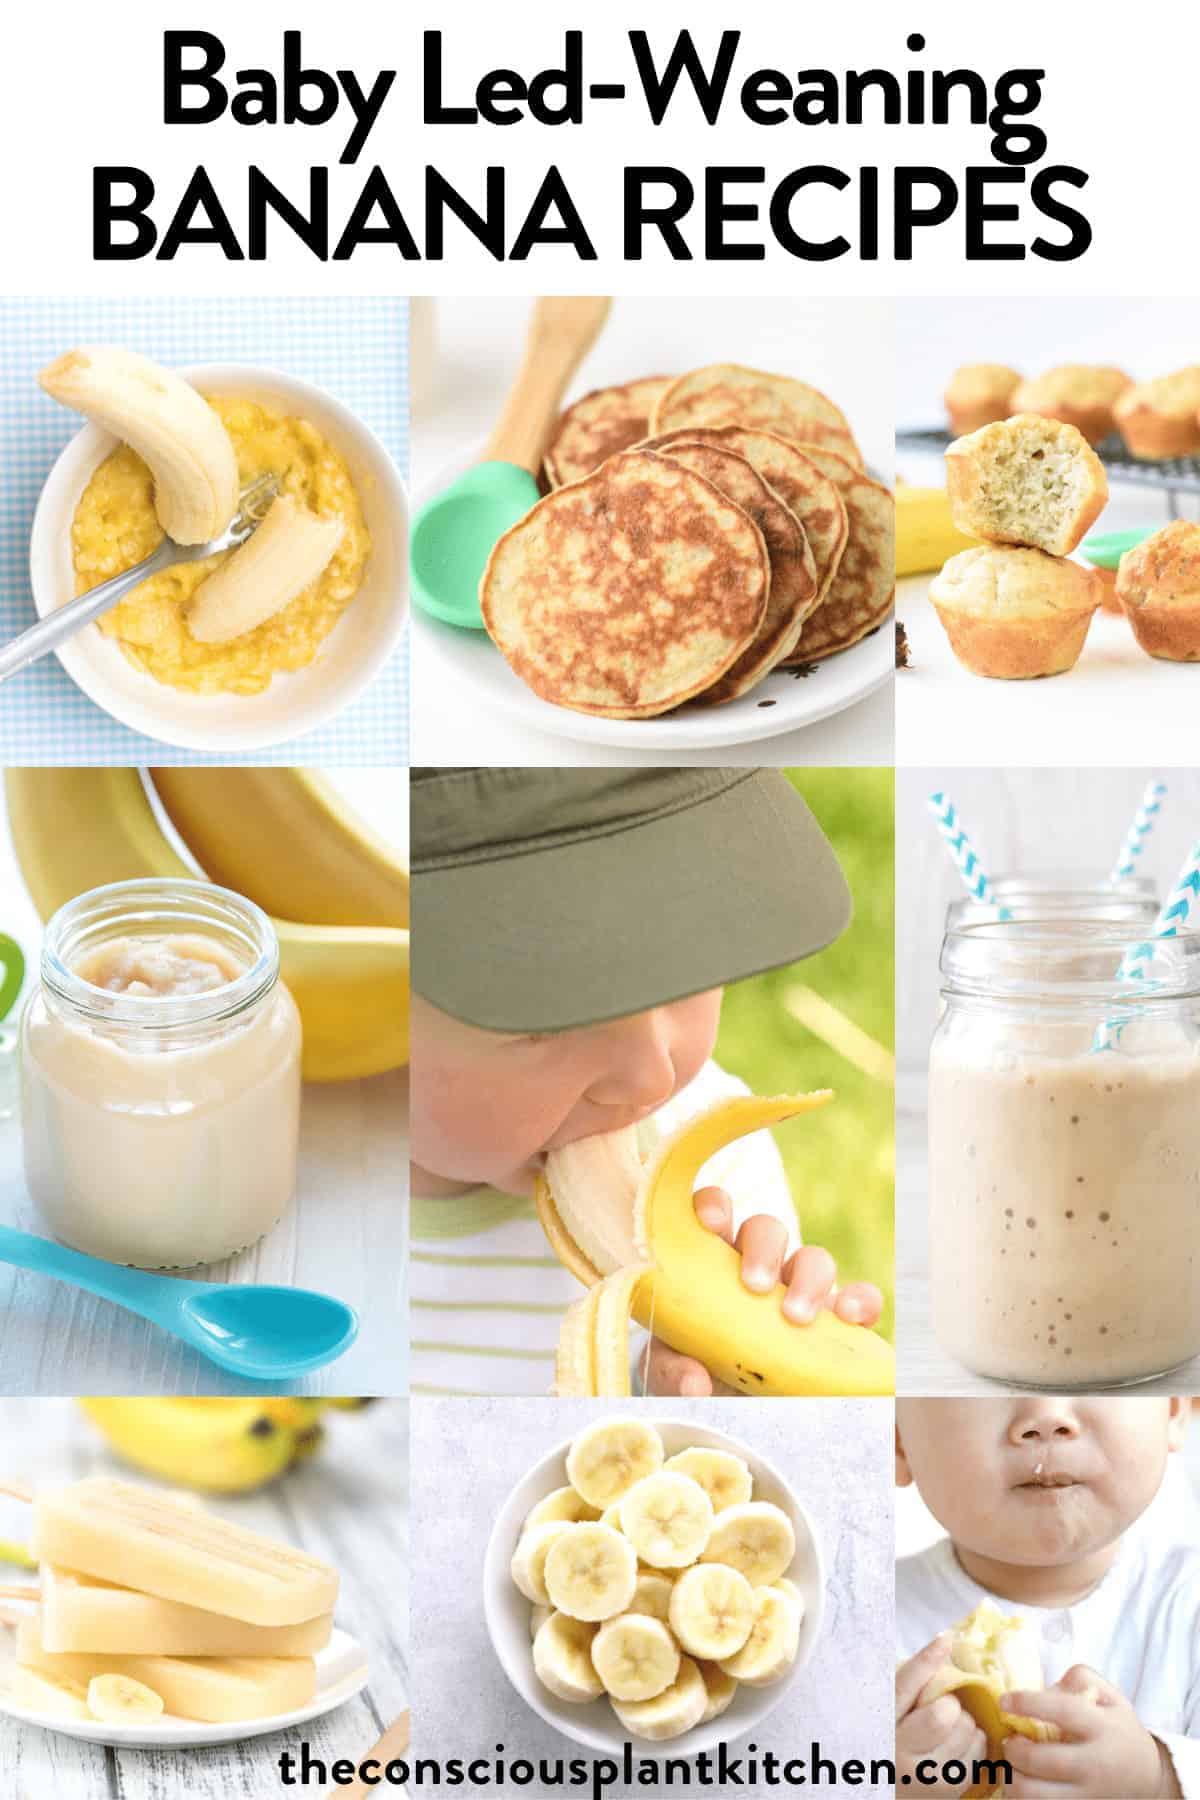 Baby Led Weaning Banana Recipes & Tips - The Conscious Plant Kitchen